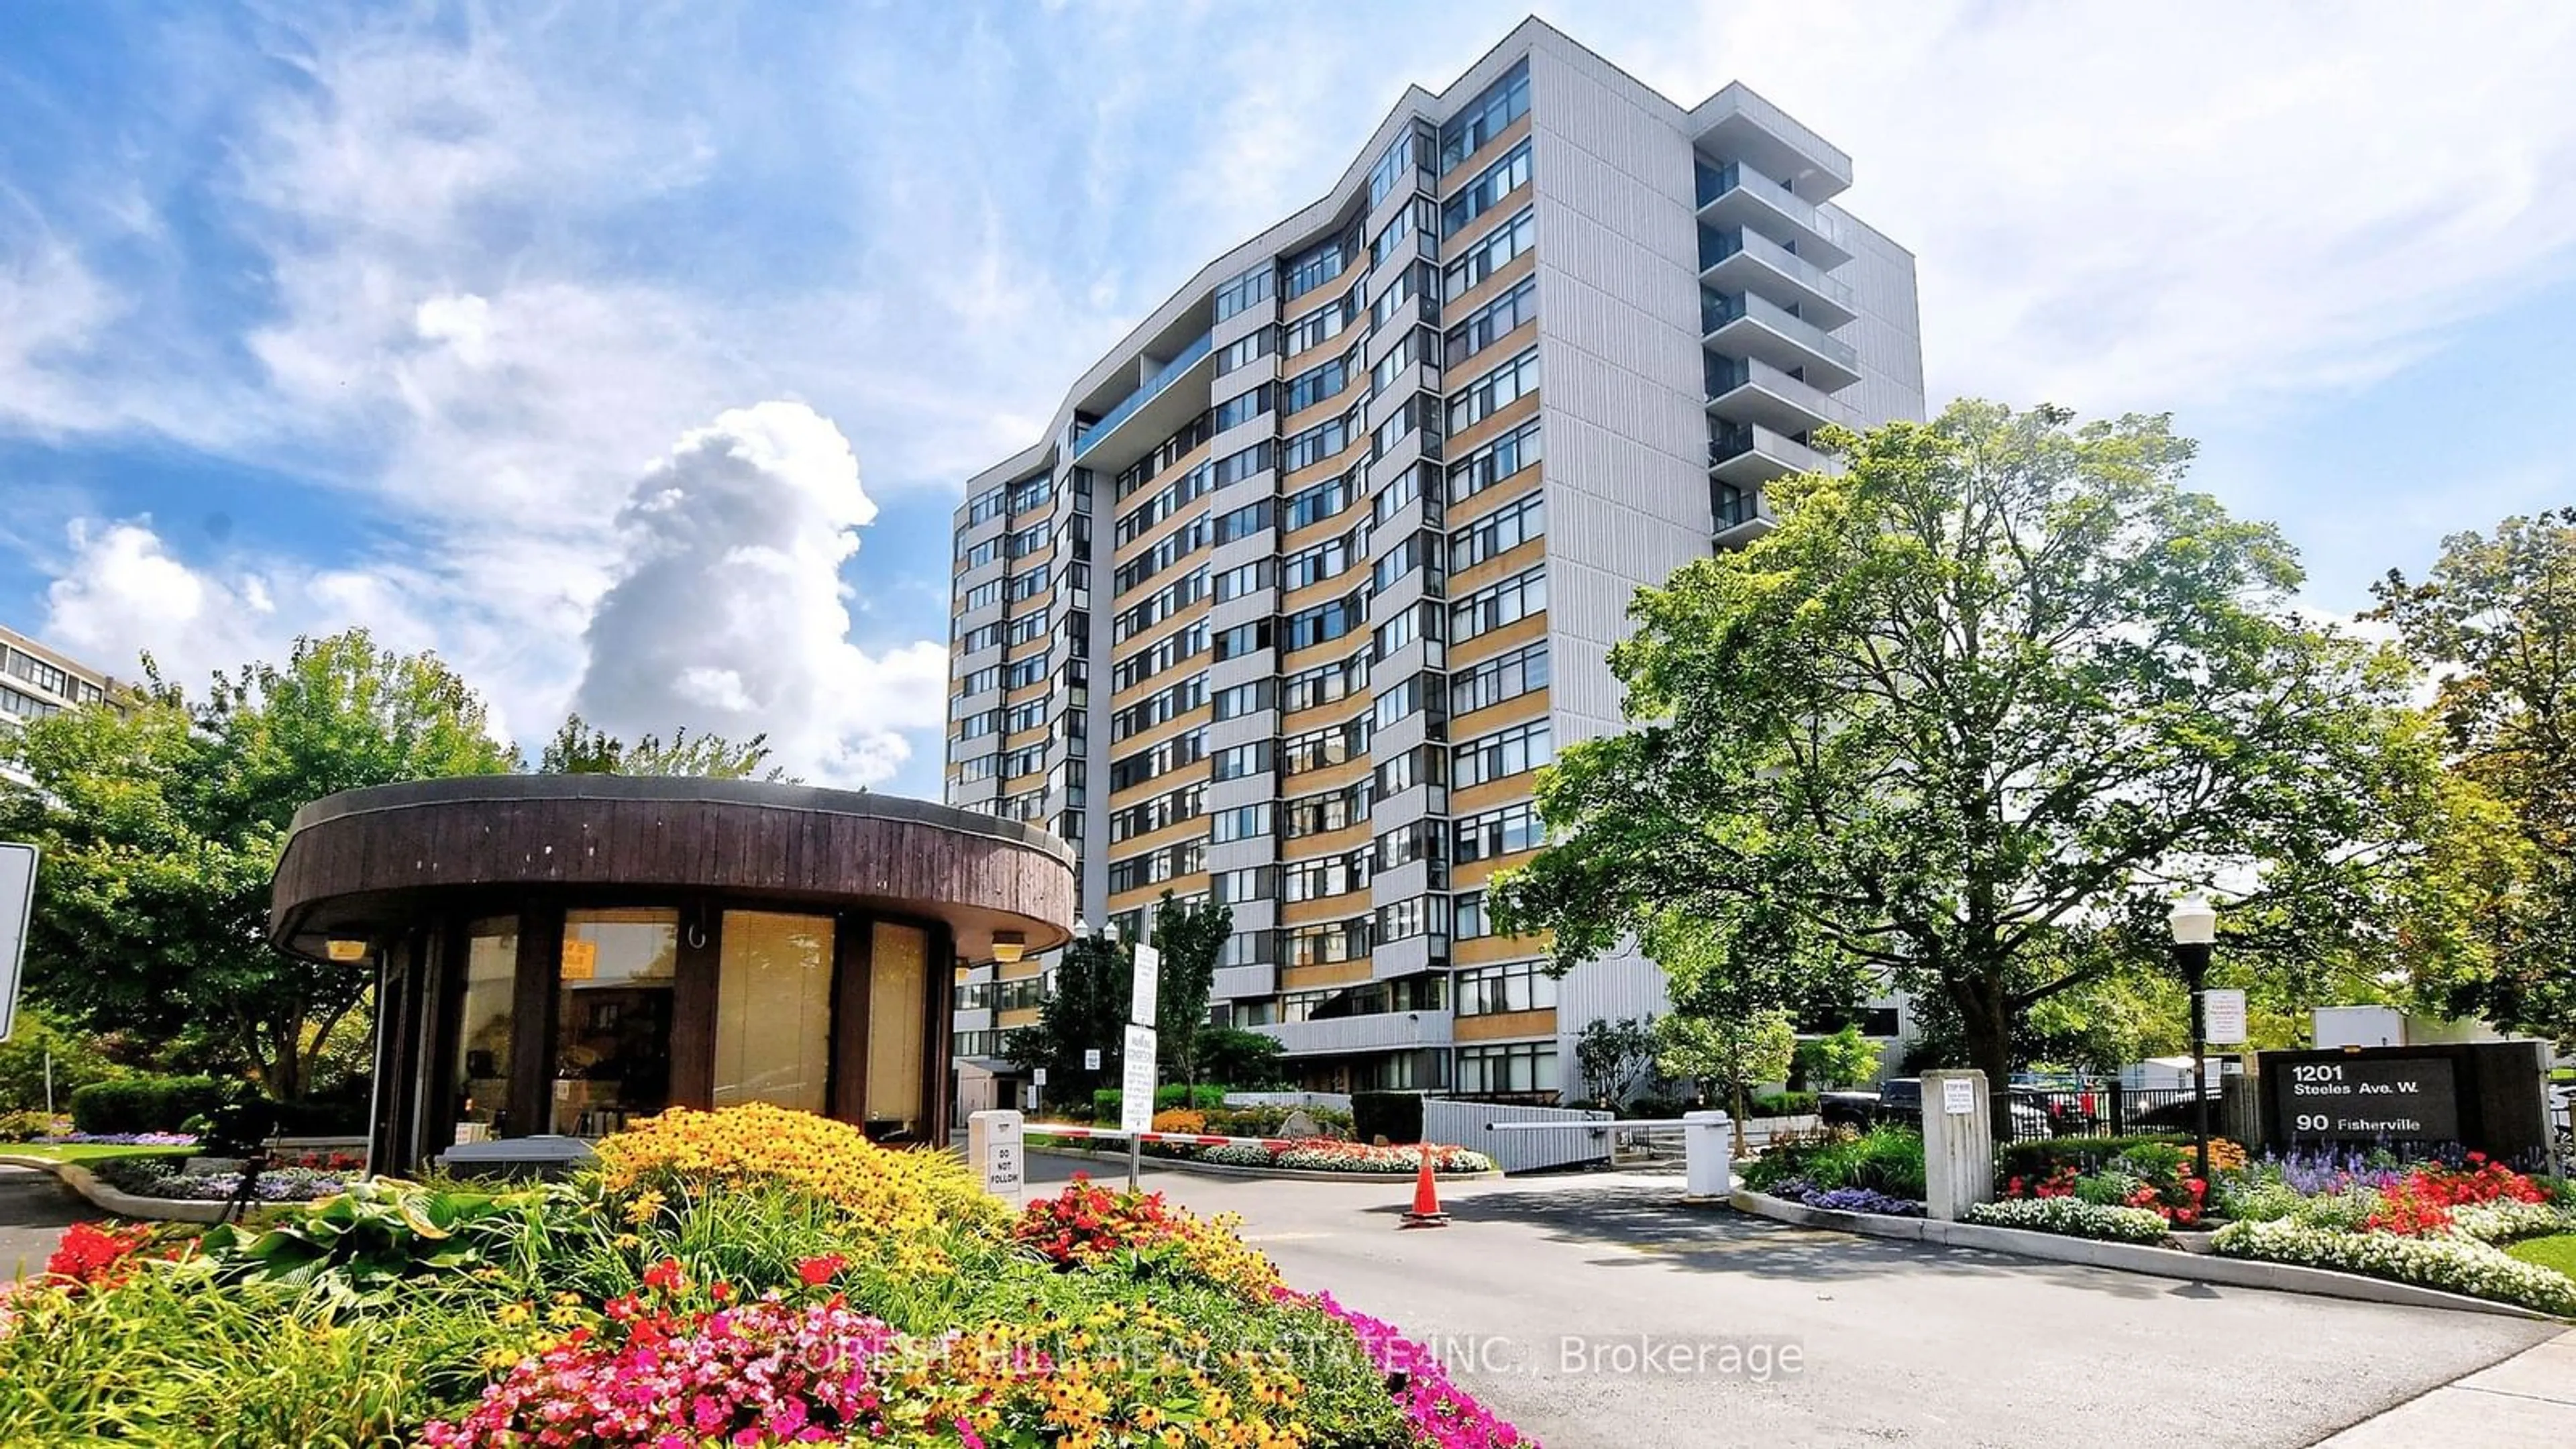 A pic from exterior of the house or condo for 90 Fisherville Rd #201, Toronto Ontario M2R 3J9